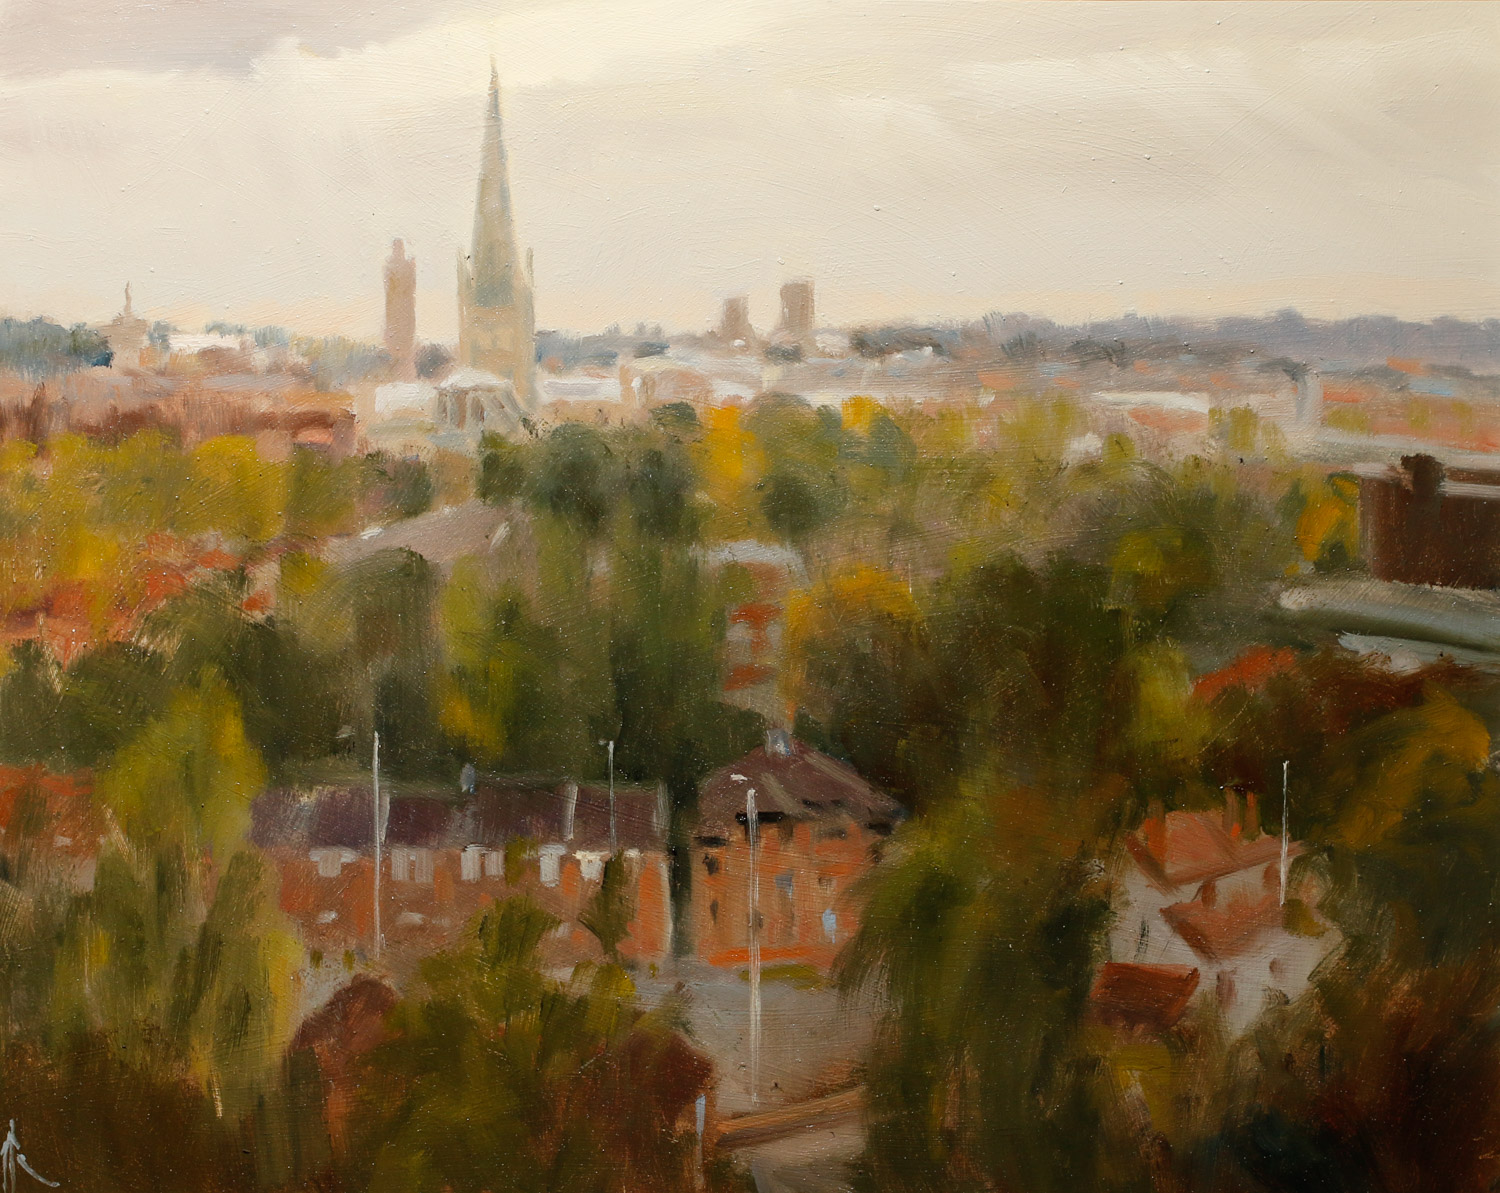 Artist Michael Richardson - The City from Mousehold Heath 16x20 Oil on Board at Paint Out Norwich 2015